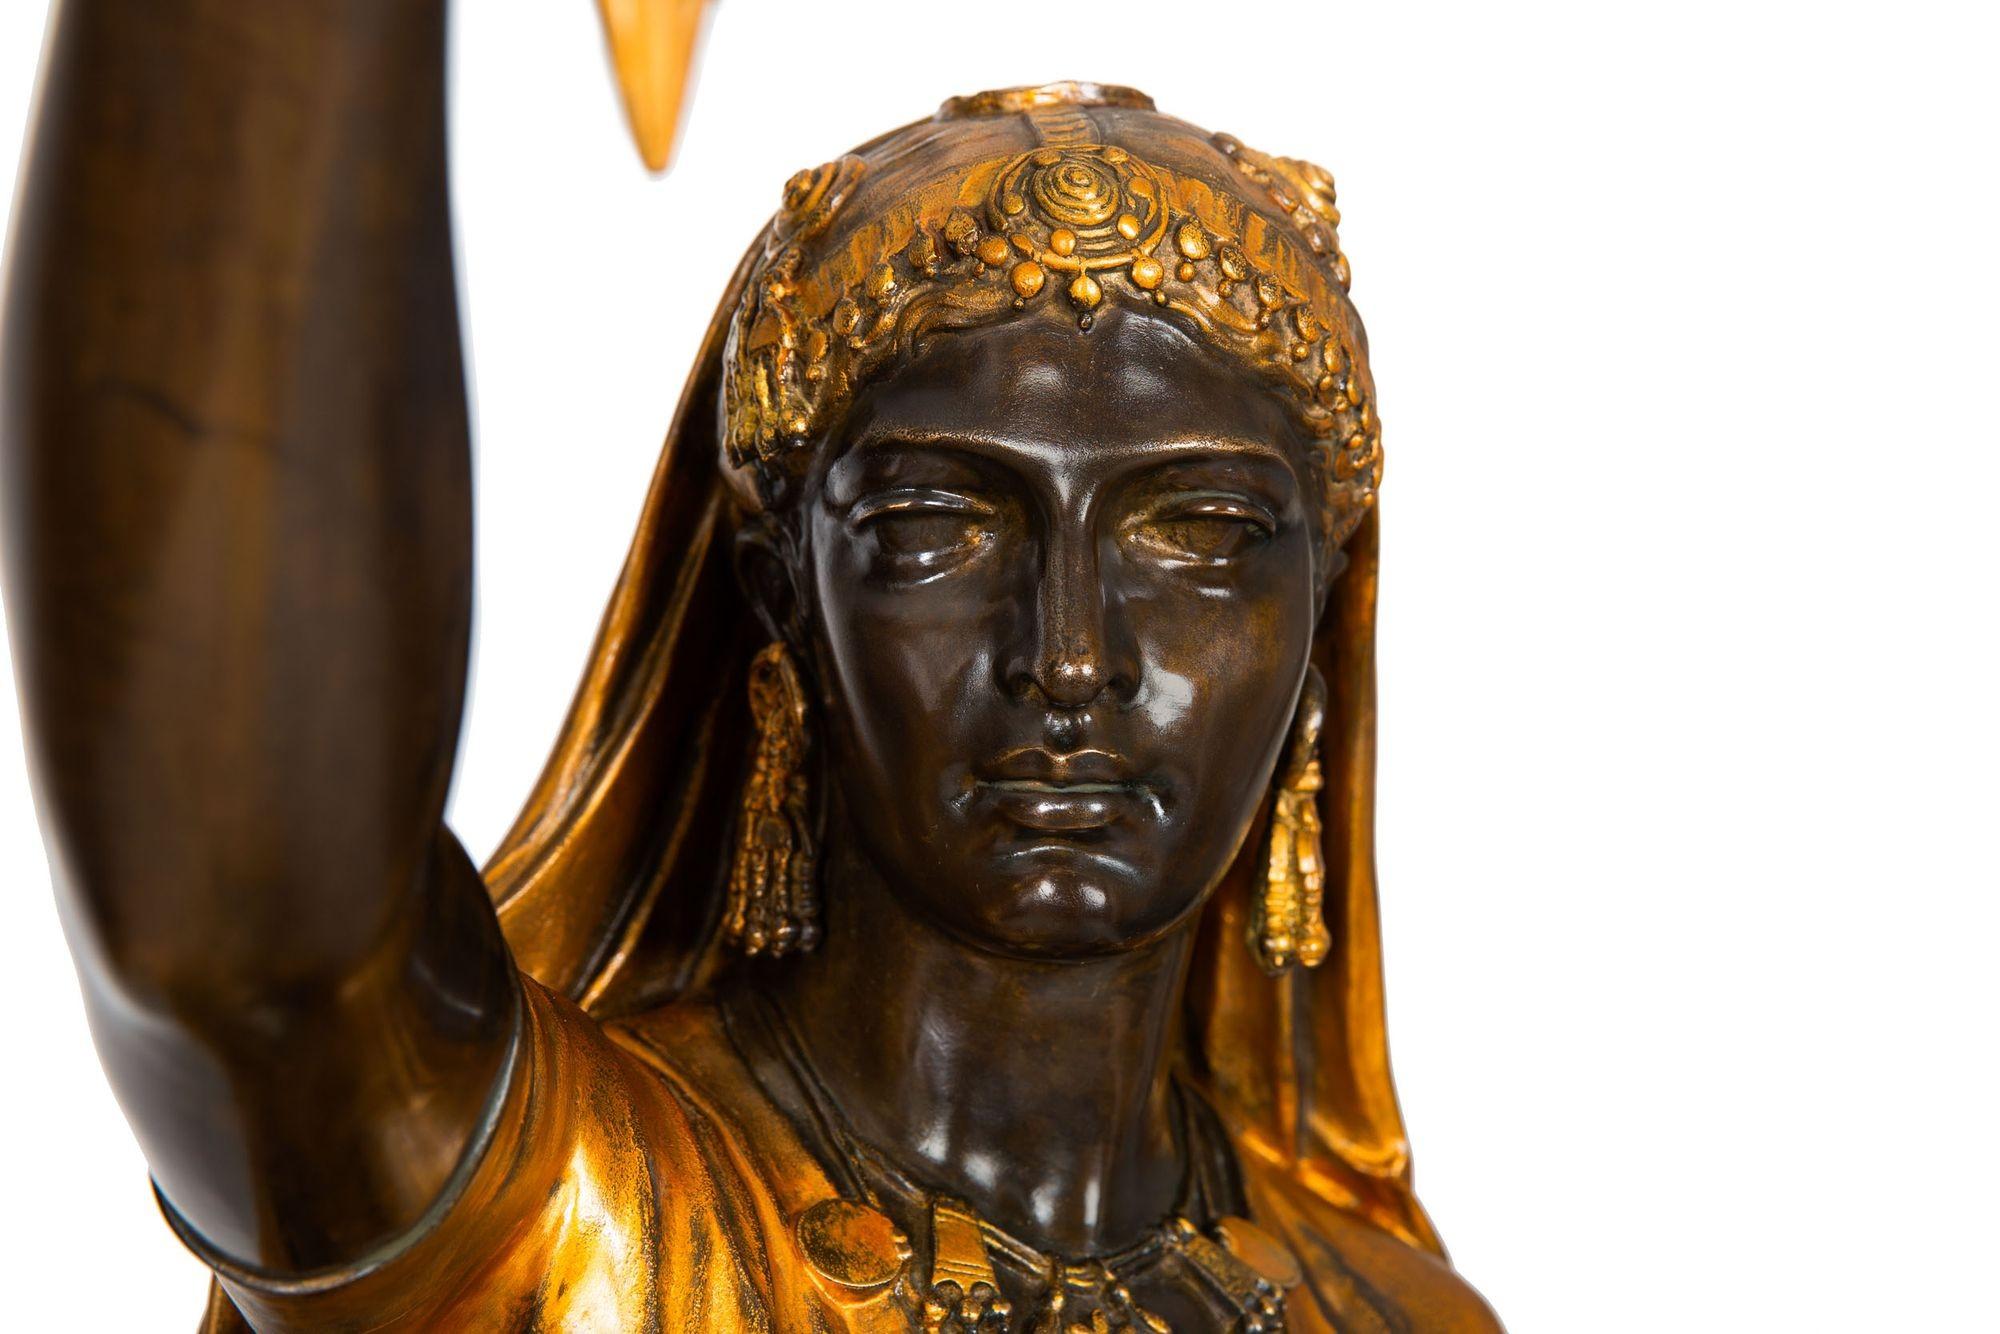 19th Century French Antique Bronze Torchiere Sculpture “Indienne Femme” by Emile Guillem